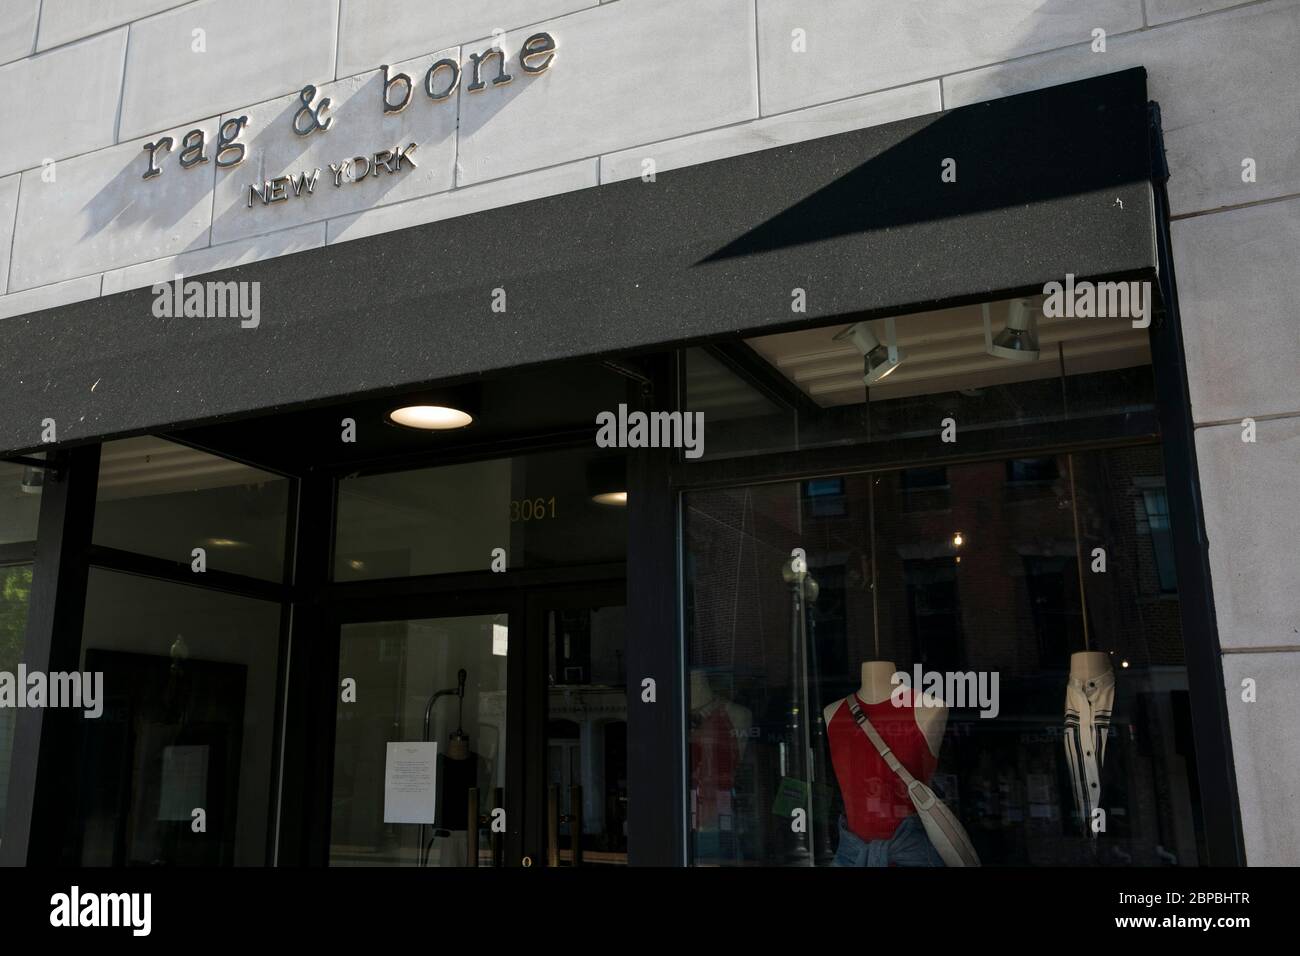 A logo sign outside of a rag & bone retail store location in Washington, D.C., on May 9, 2020. Stock Photo